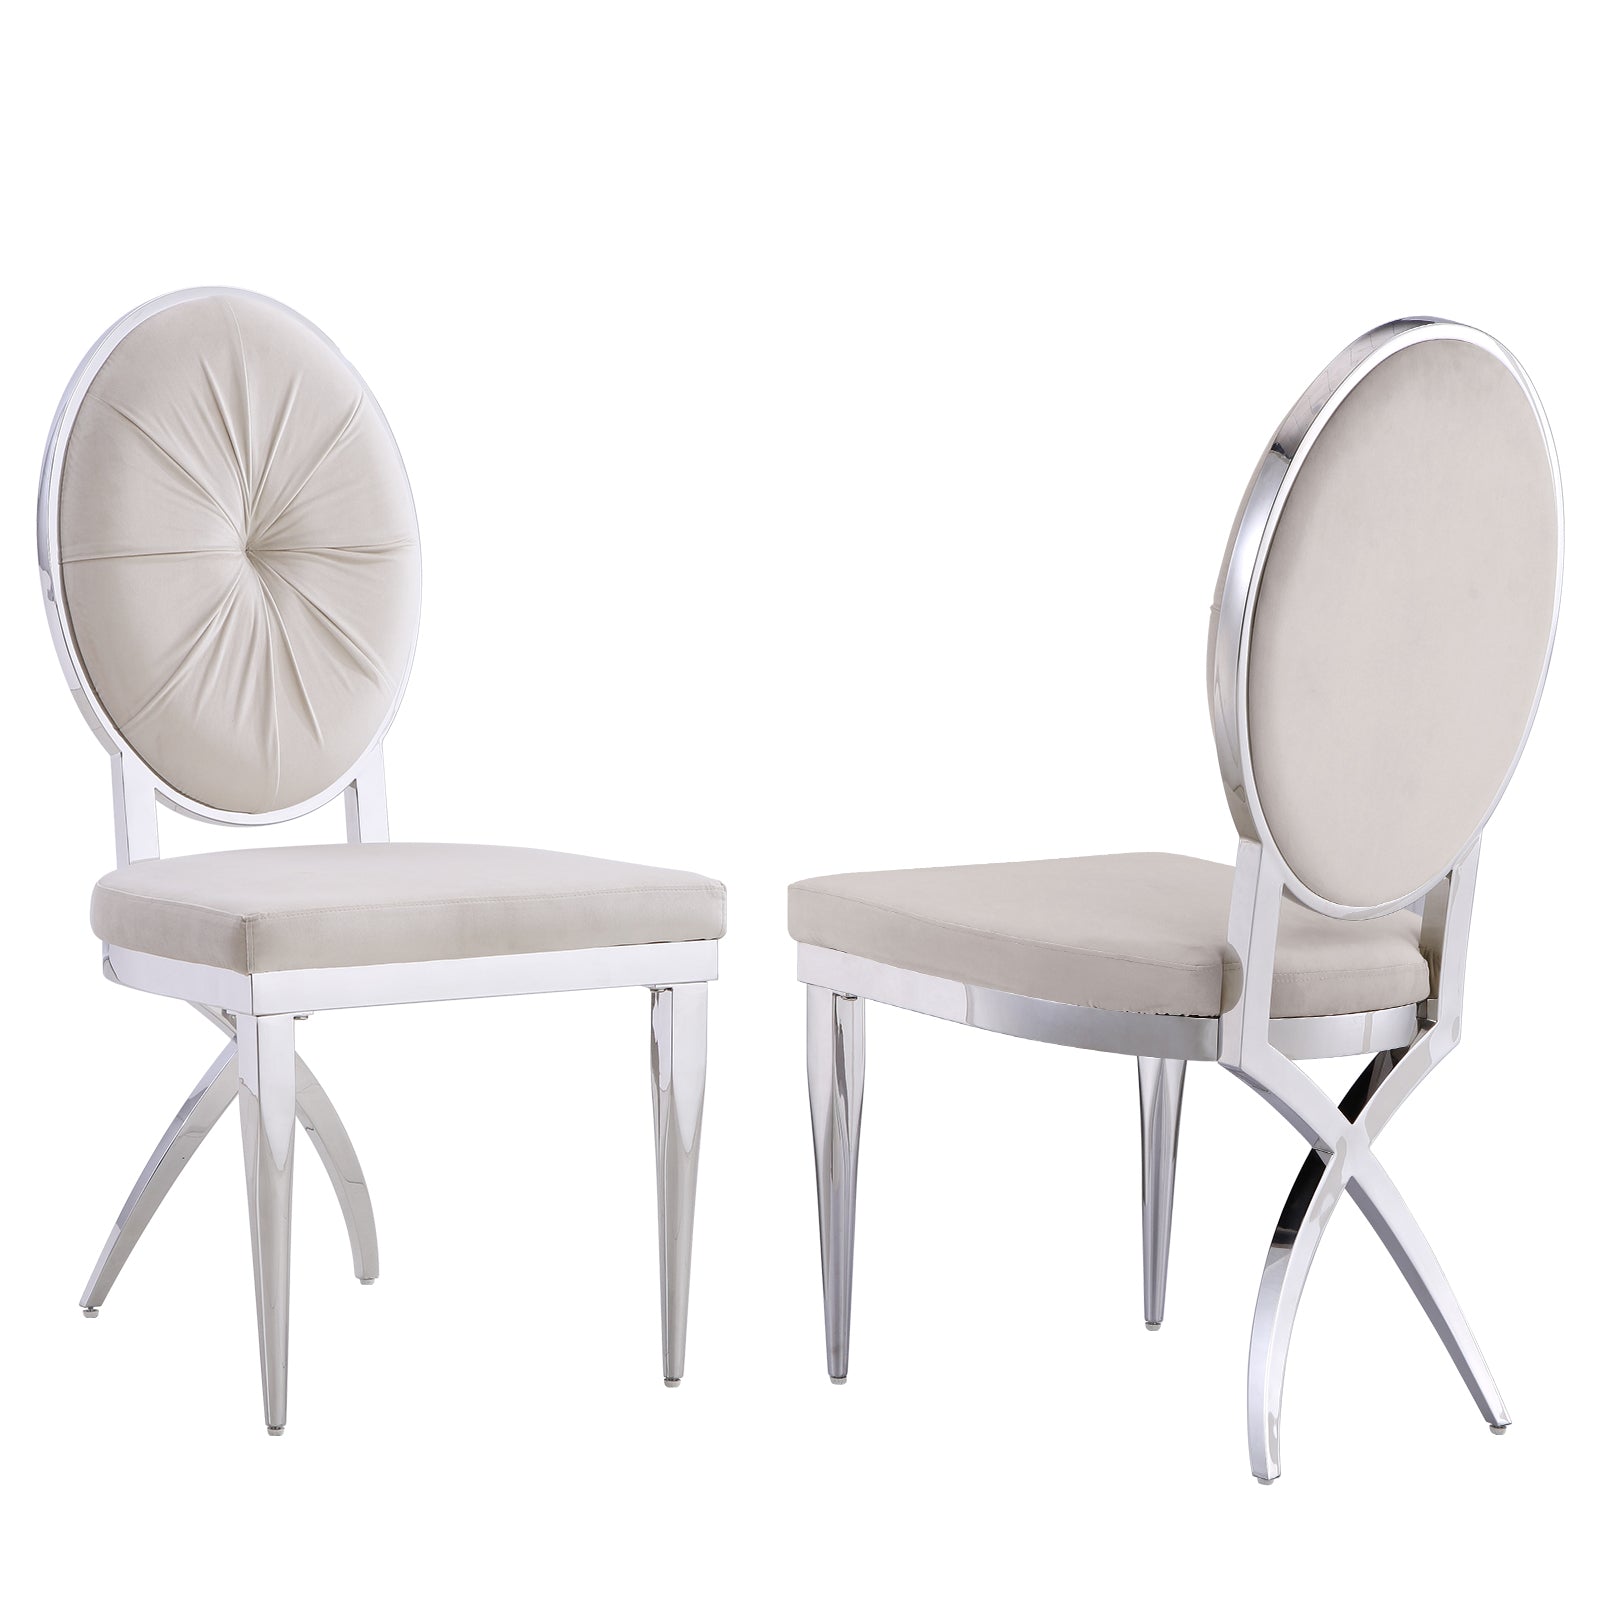 Title: Exquisite Beauty and Comfort: Embellishing Your Dining Room with Jewel-inspired Beige Velvet Chairs